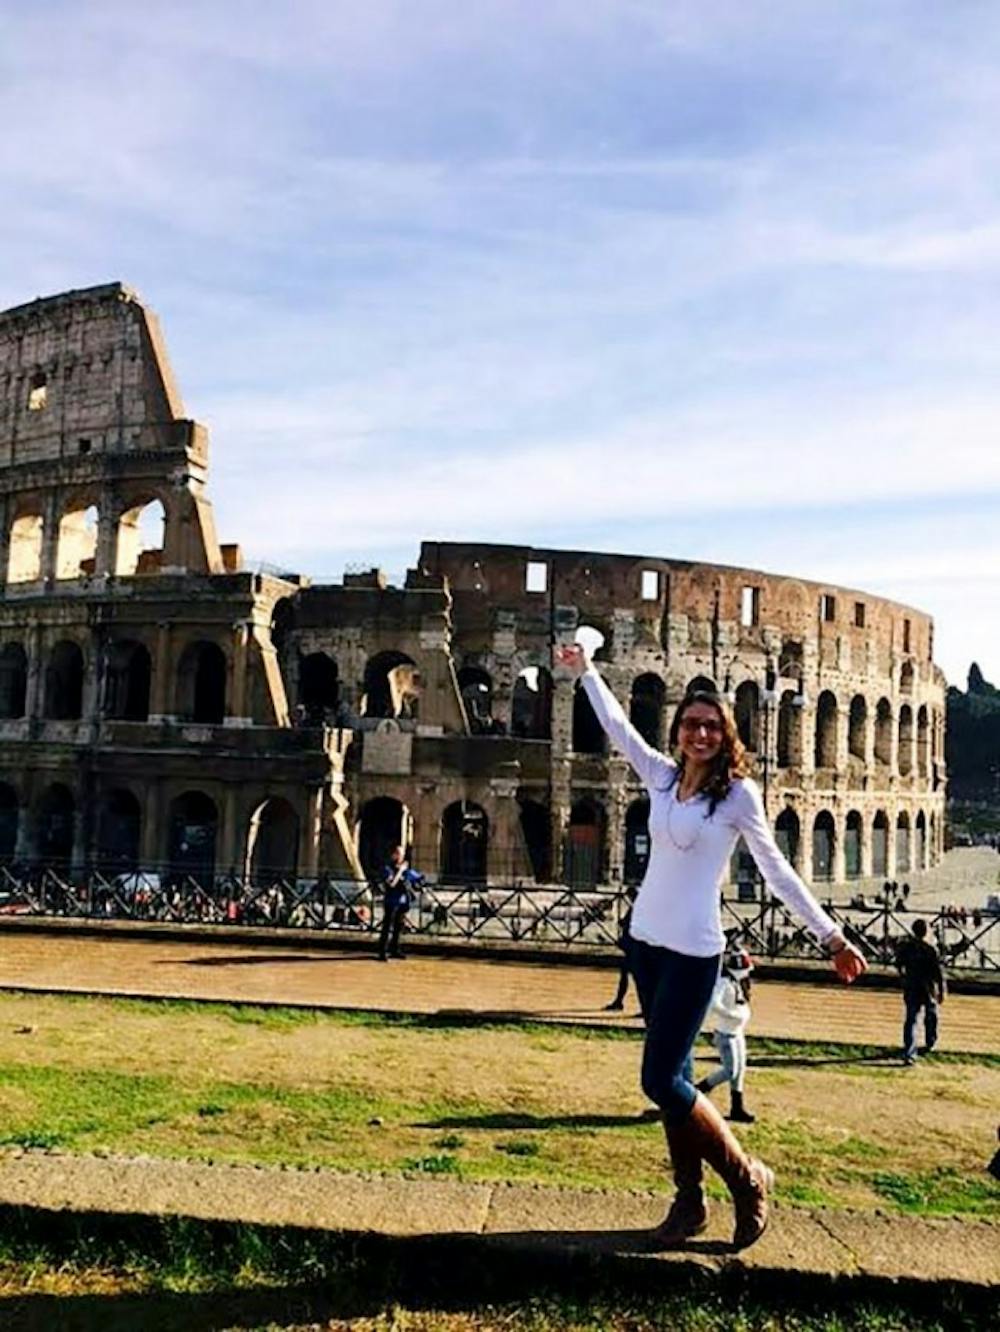 Silvana D&#39;Ettorre, a junior health and human services major, poses at the Coliseum in Rome.
D&rsquo;Ettorre was one of about 190 students to travel abroad this semester.
Courtesy of Silvana D&#39;Ettorre